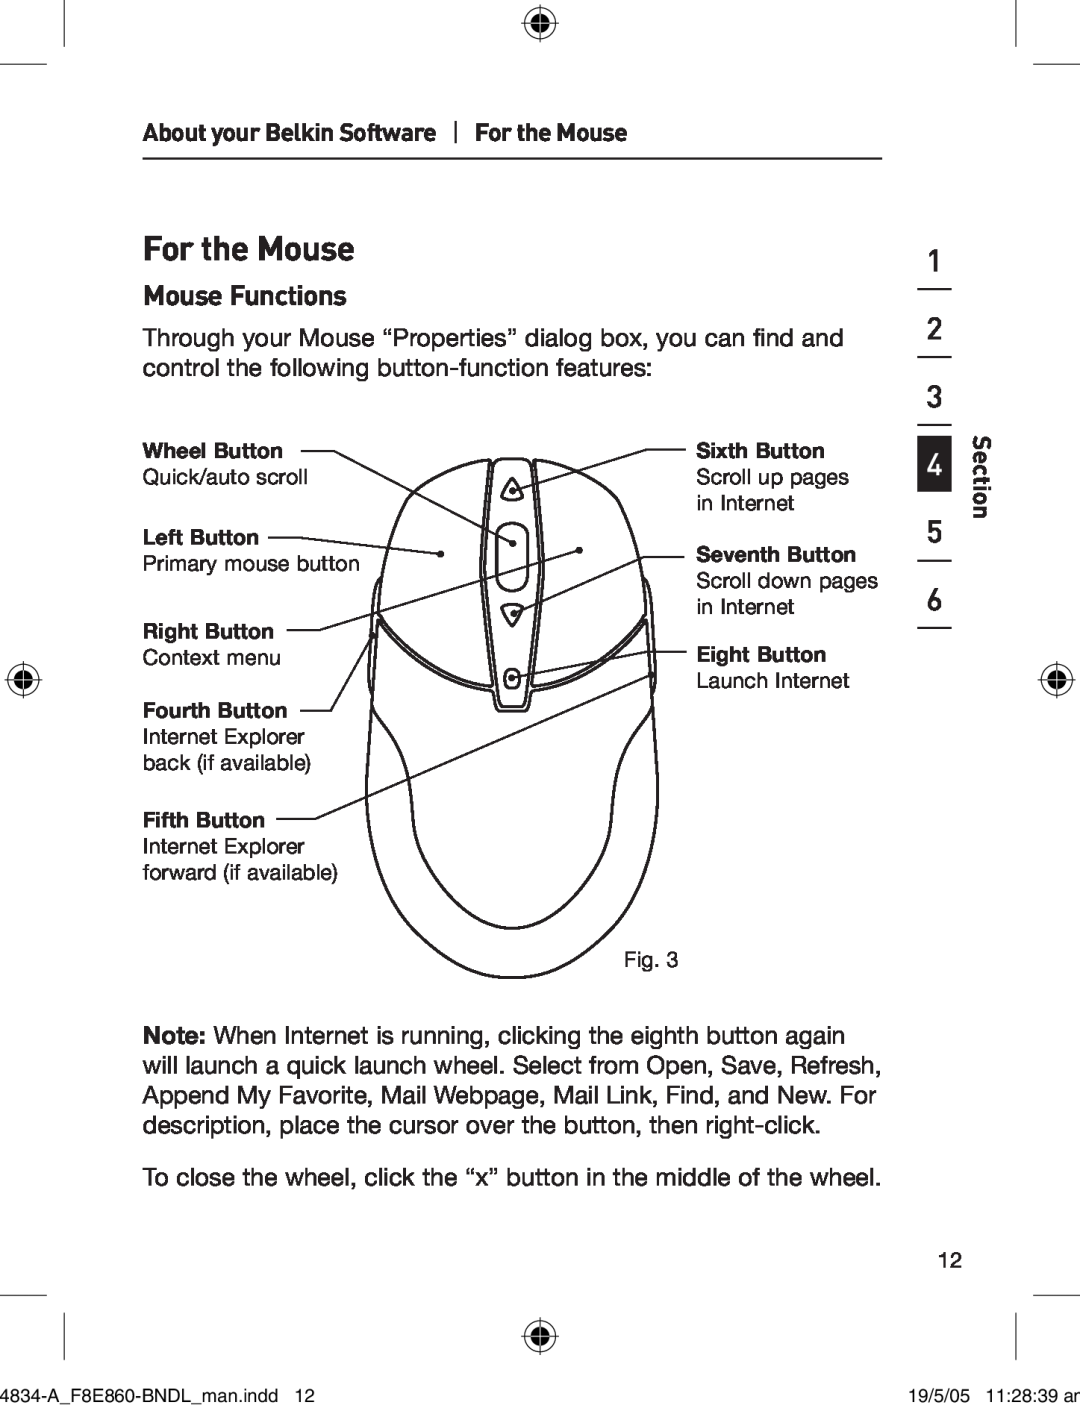 Belkin 280 manual Mouse Functions, About your Belkin Software For the Mouse, Section 